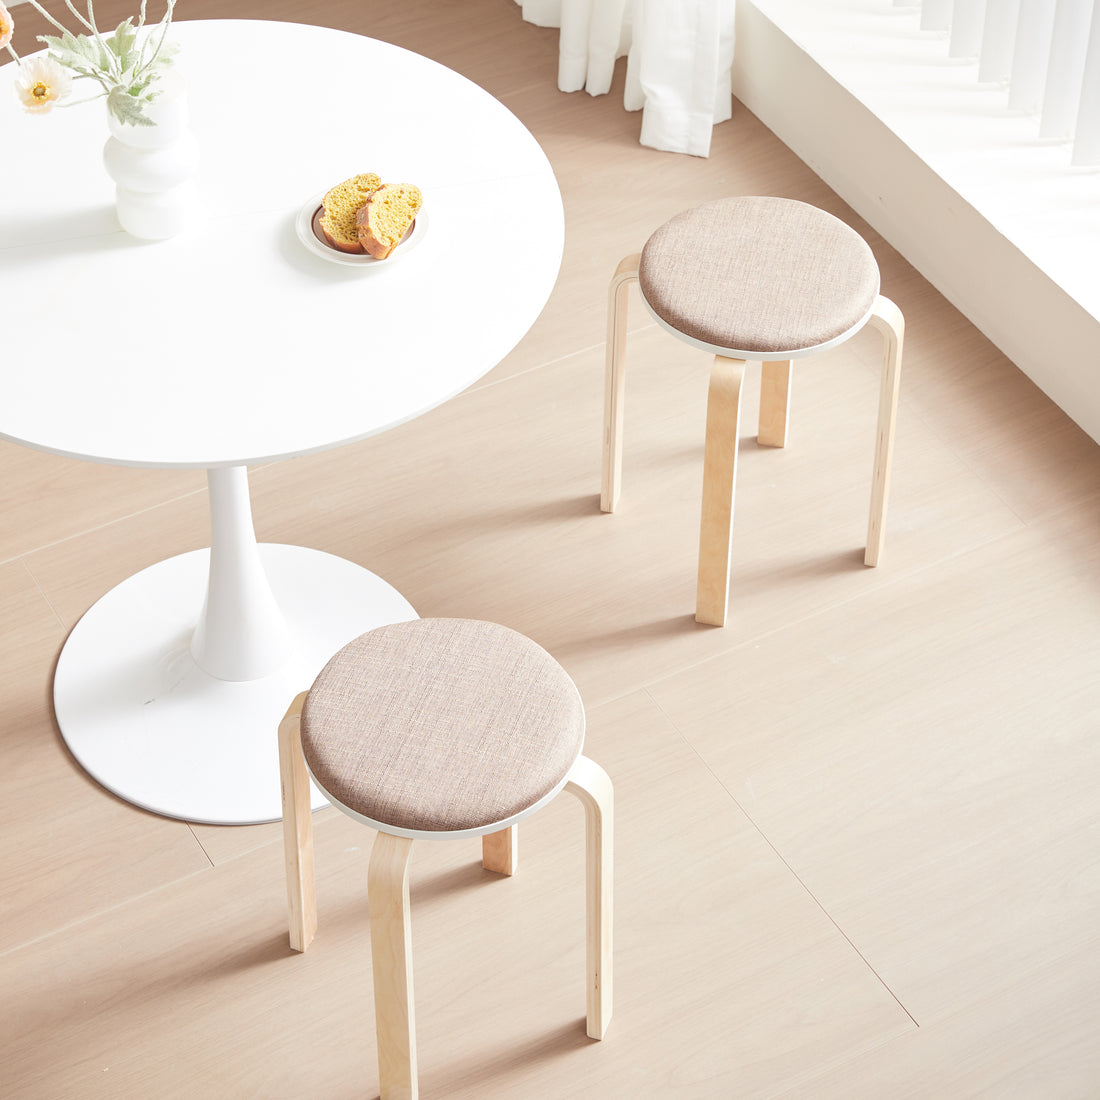 Set Of 4 Stackable Stools, Round Backless Chairs